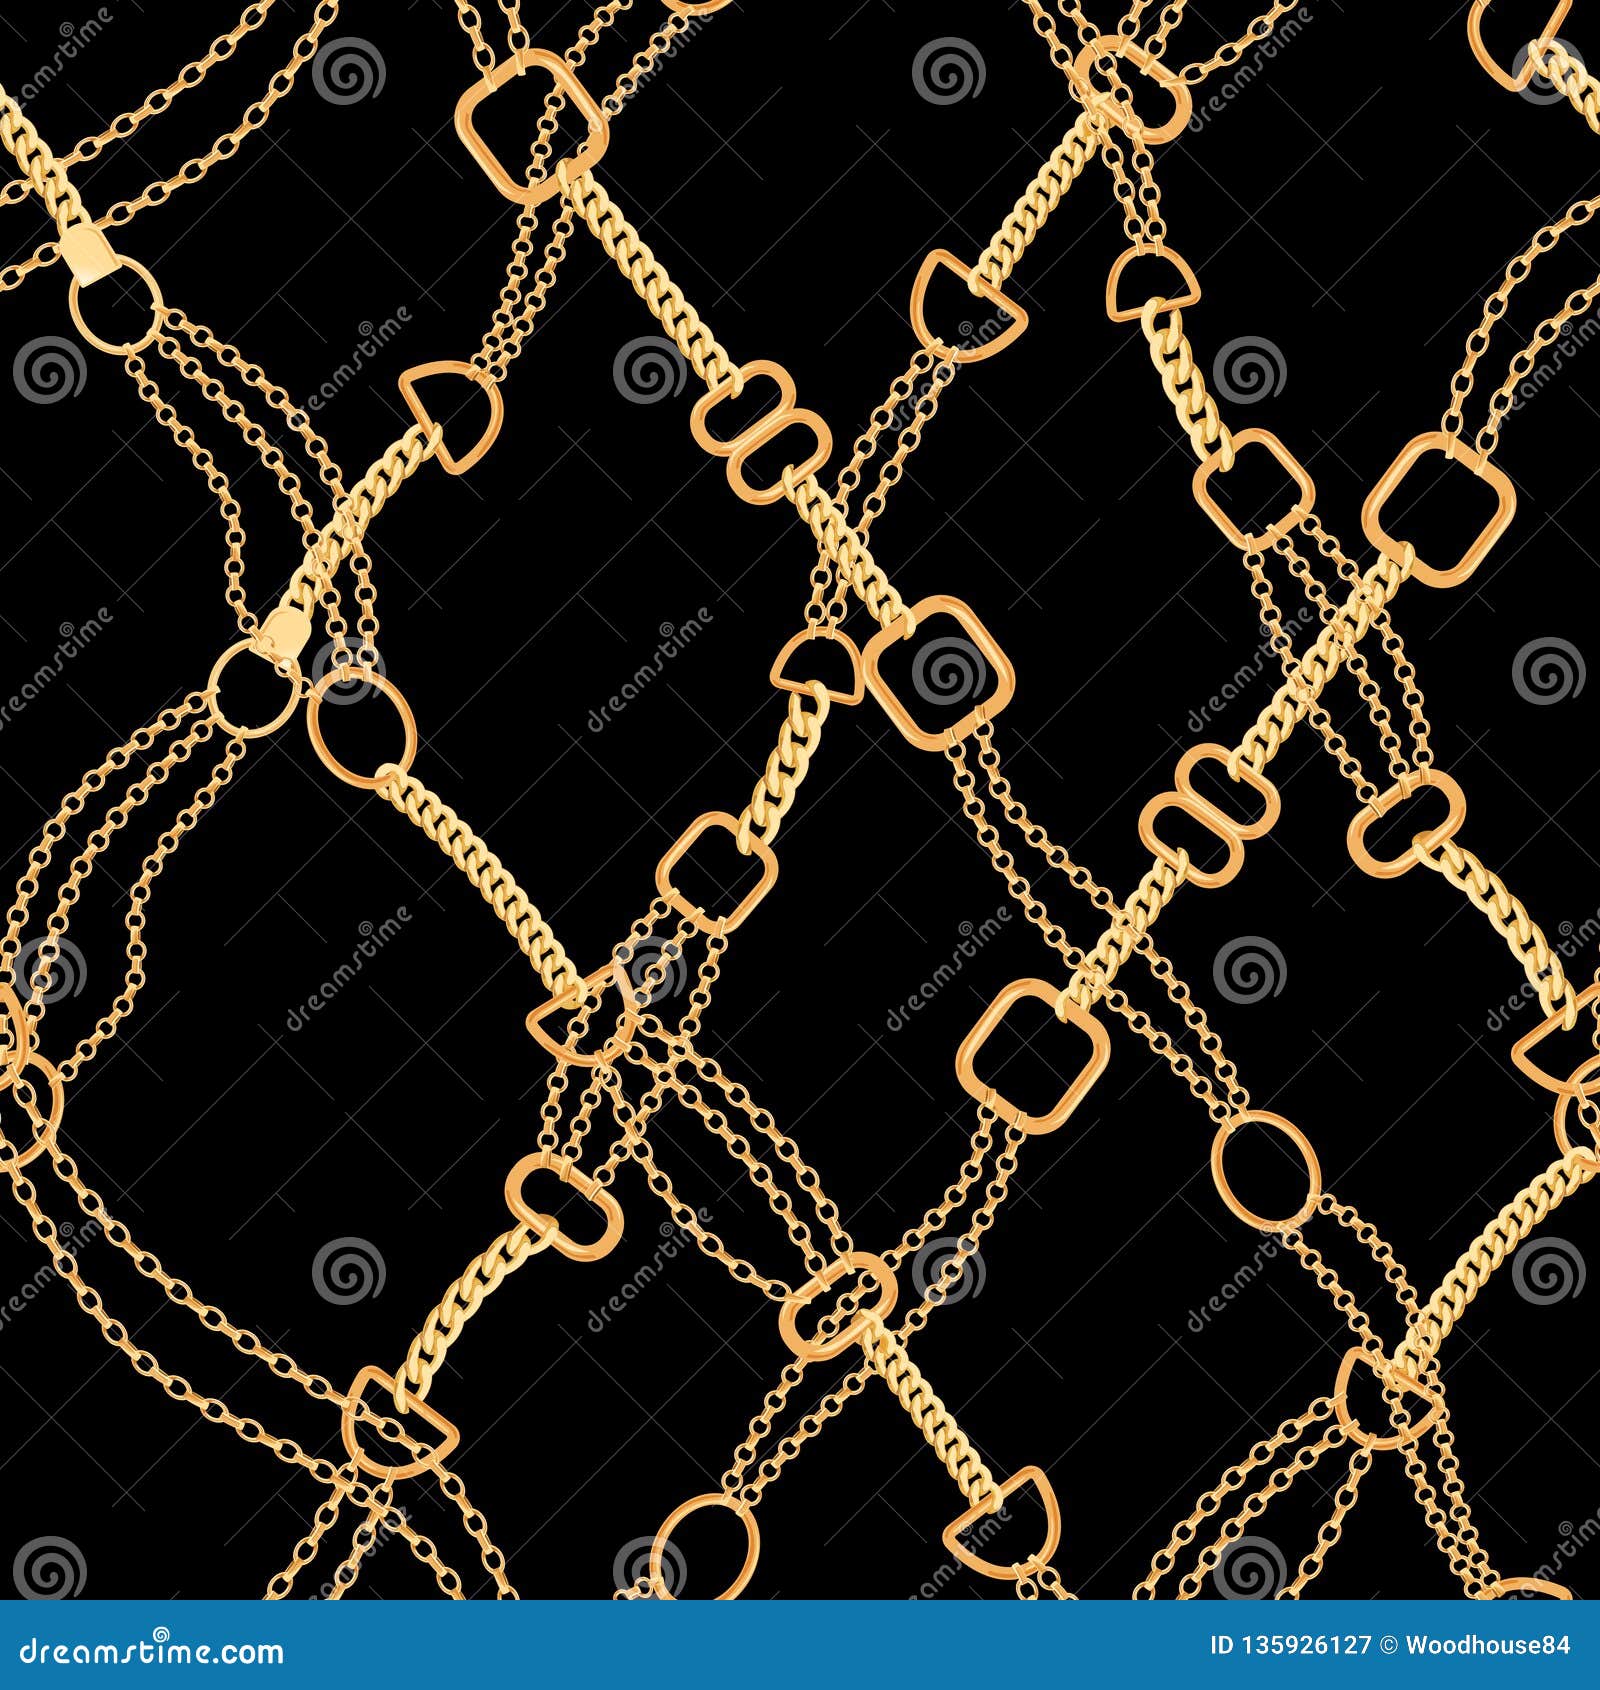 golden chains fashion seamless pattern. fabric background with gold chain. luxury  with jewelry s textile